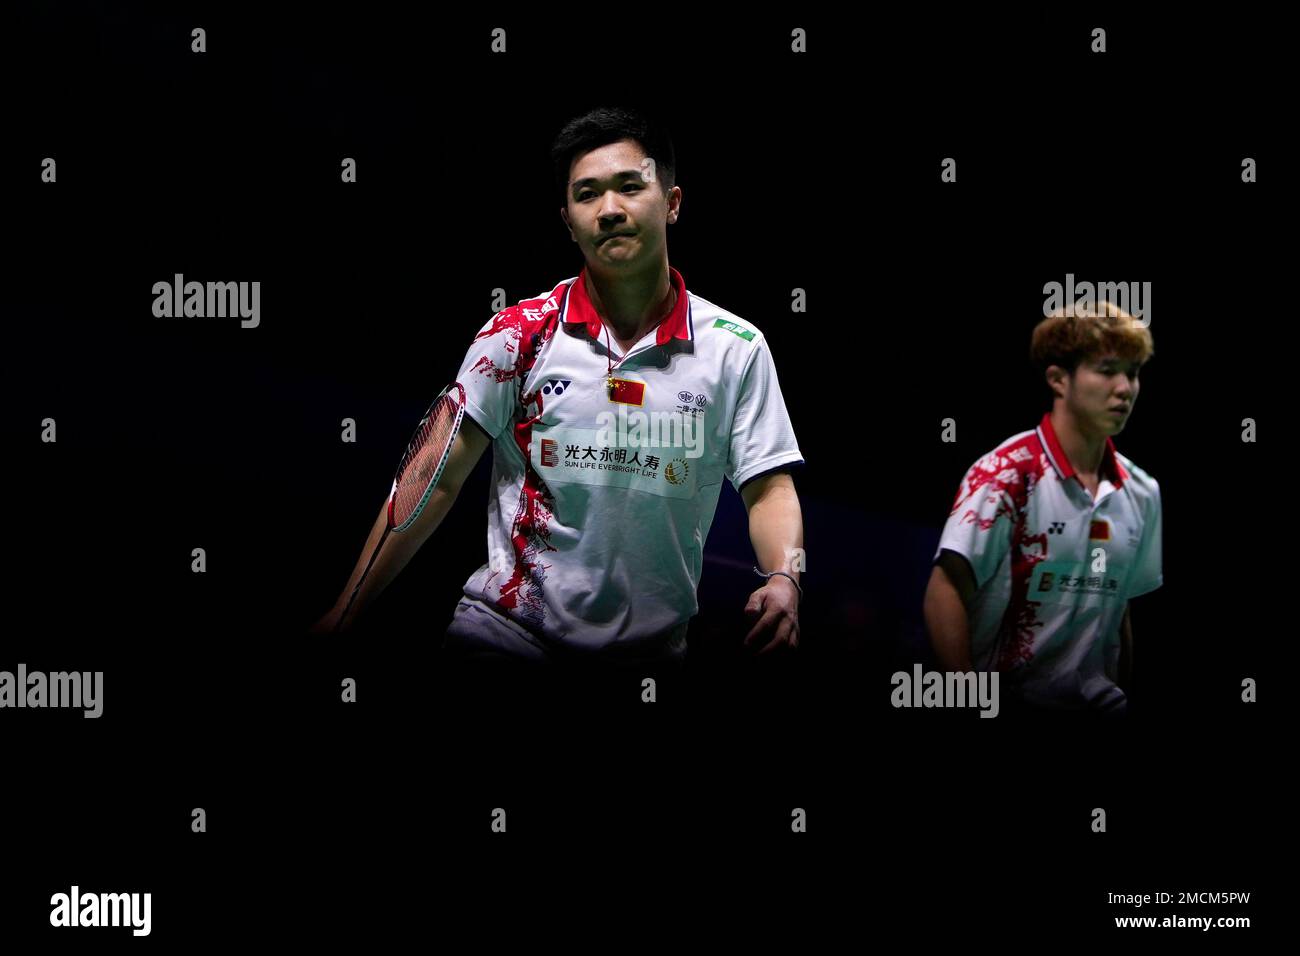 Chinas Tan Qiang and He Ji Ting, right, react during their Mens badminton doubles match against Englands Callum Hemming and Steven Stallwood at the BWF World Championships in Huelva, Spain, Wednesday, Dec.